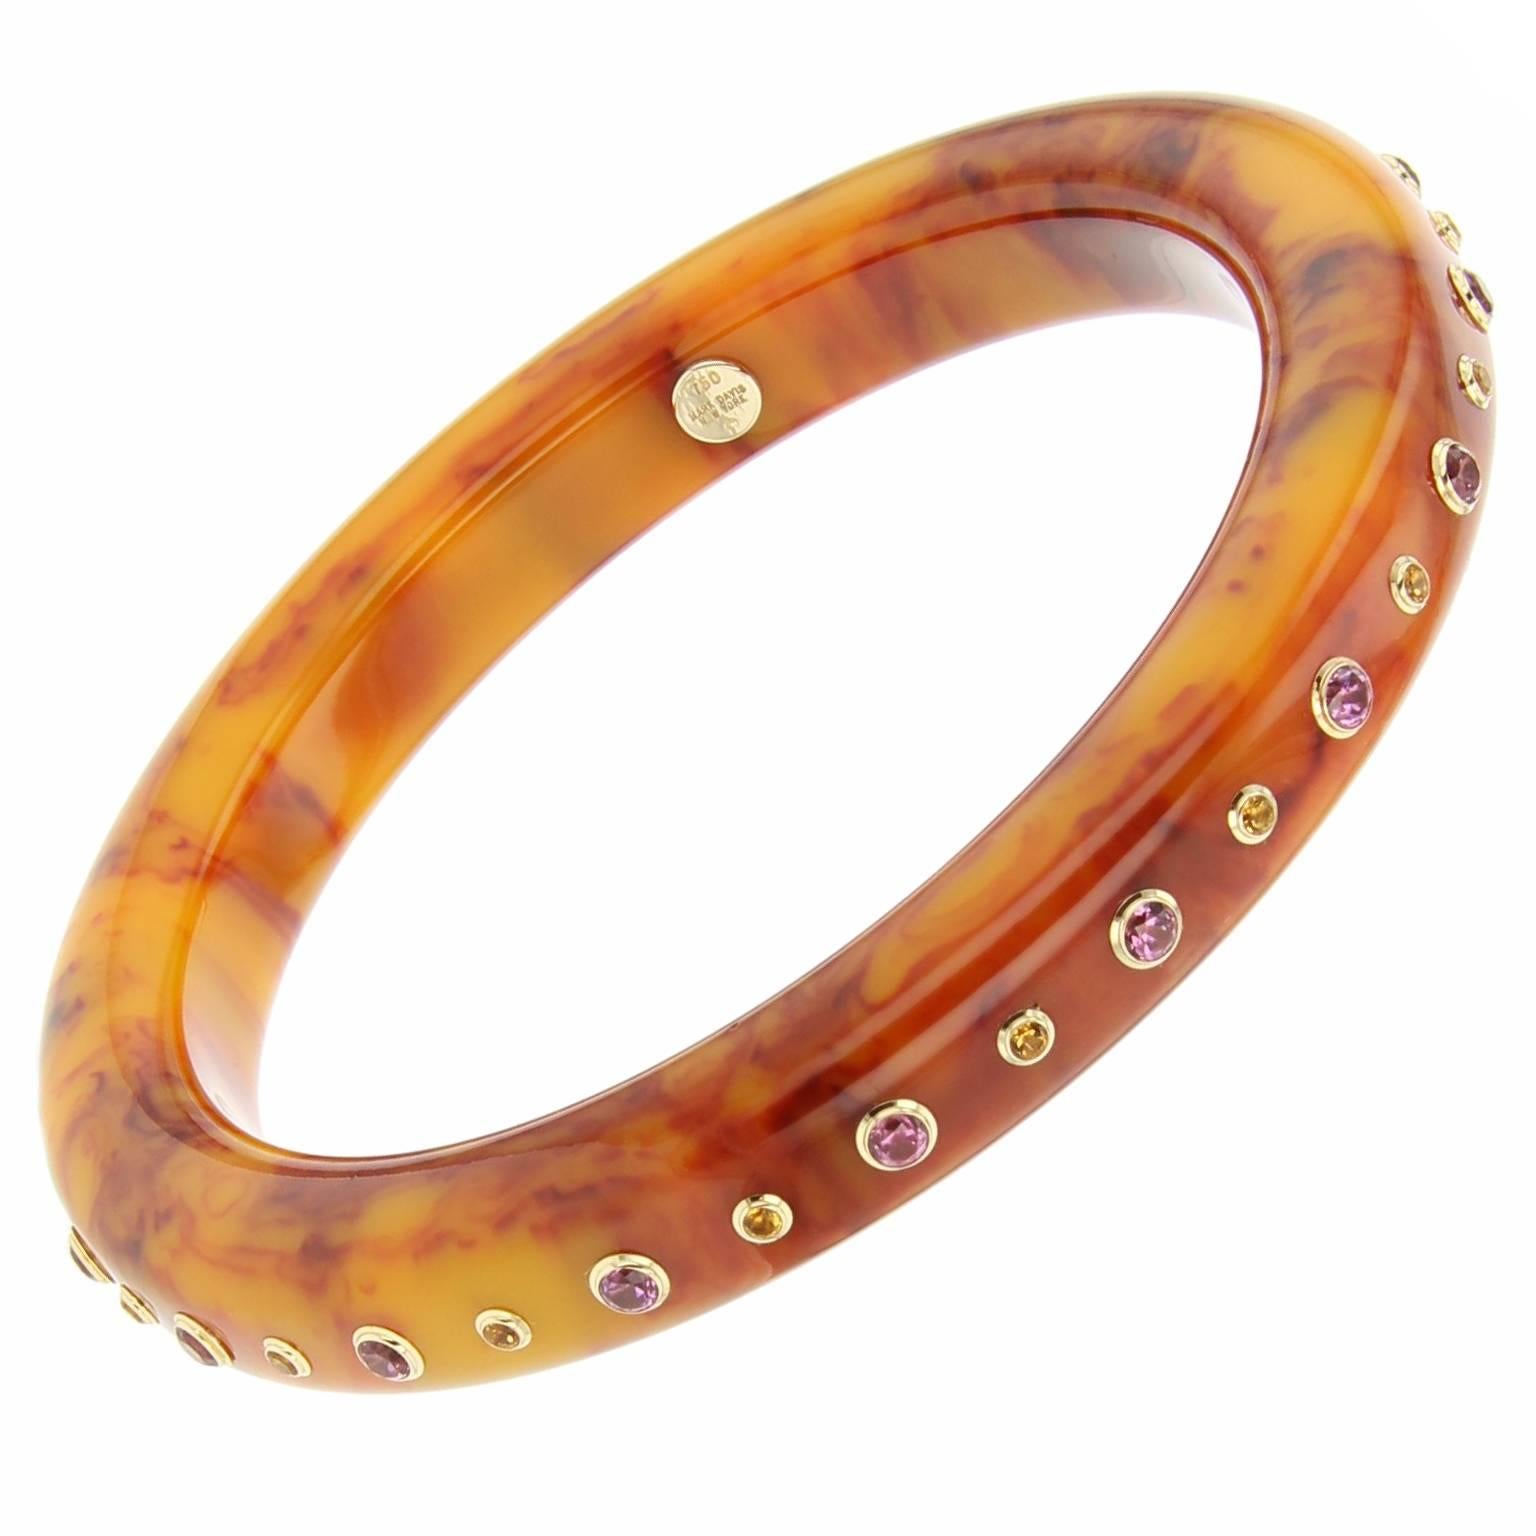 This slim Mark Davis bangle was handcrafted using marbled orange vintage bakelite.  A line of alternating citrine and rhodolite garnet bezel-set in 18k yellow gold encircles the bangle. Beautiful on its own, this bangle makes a stunning addition to